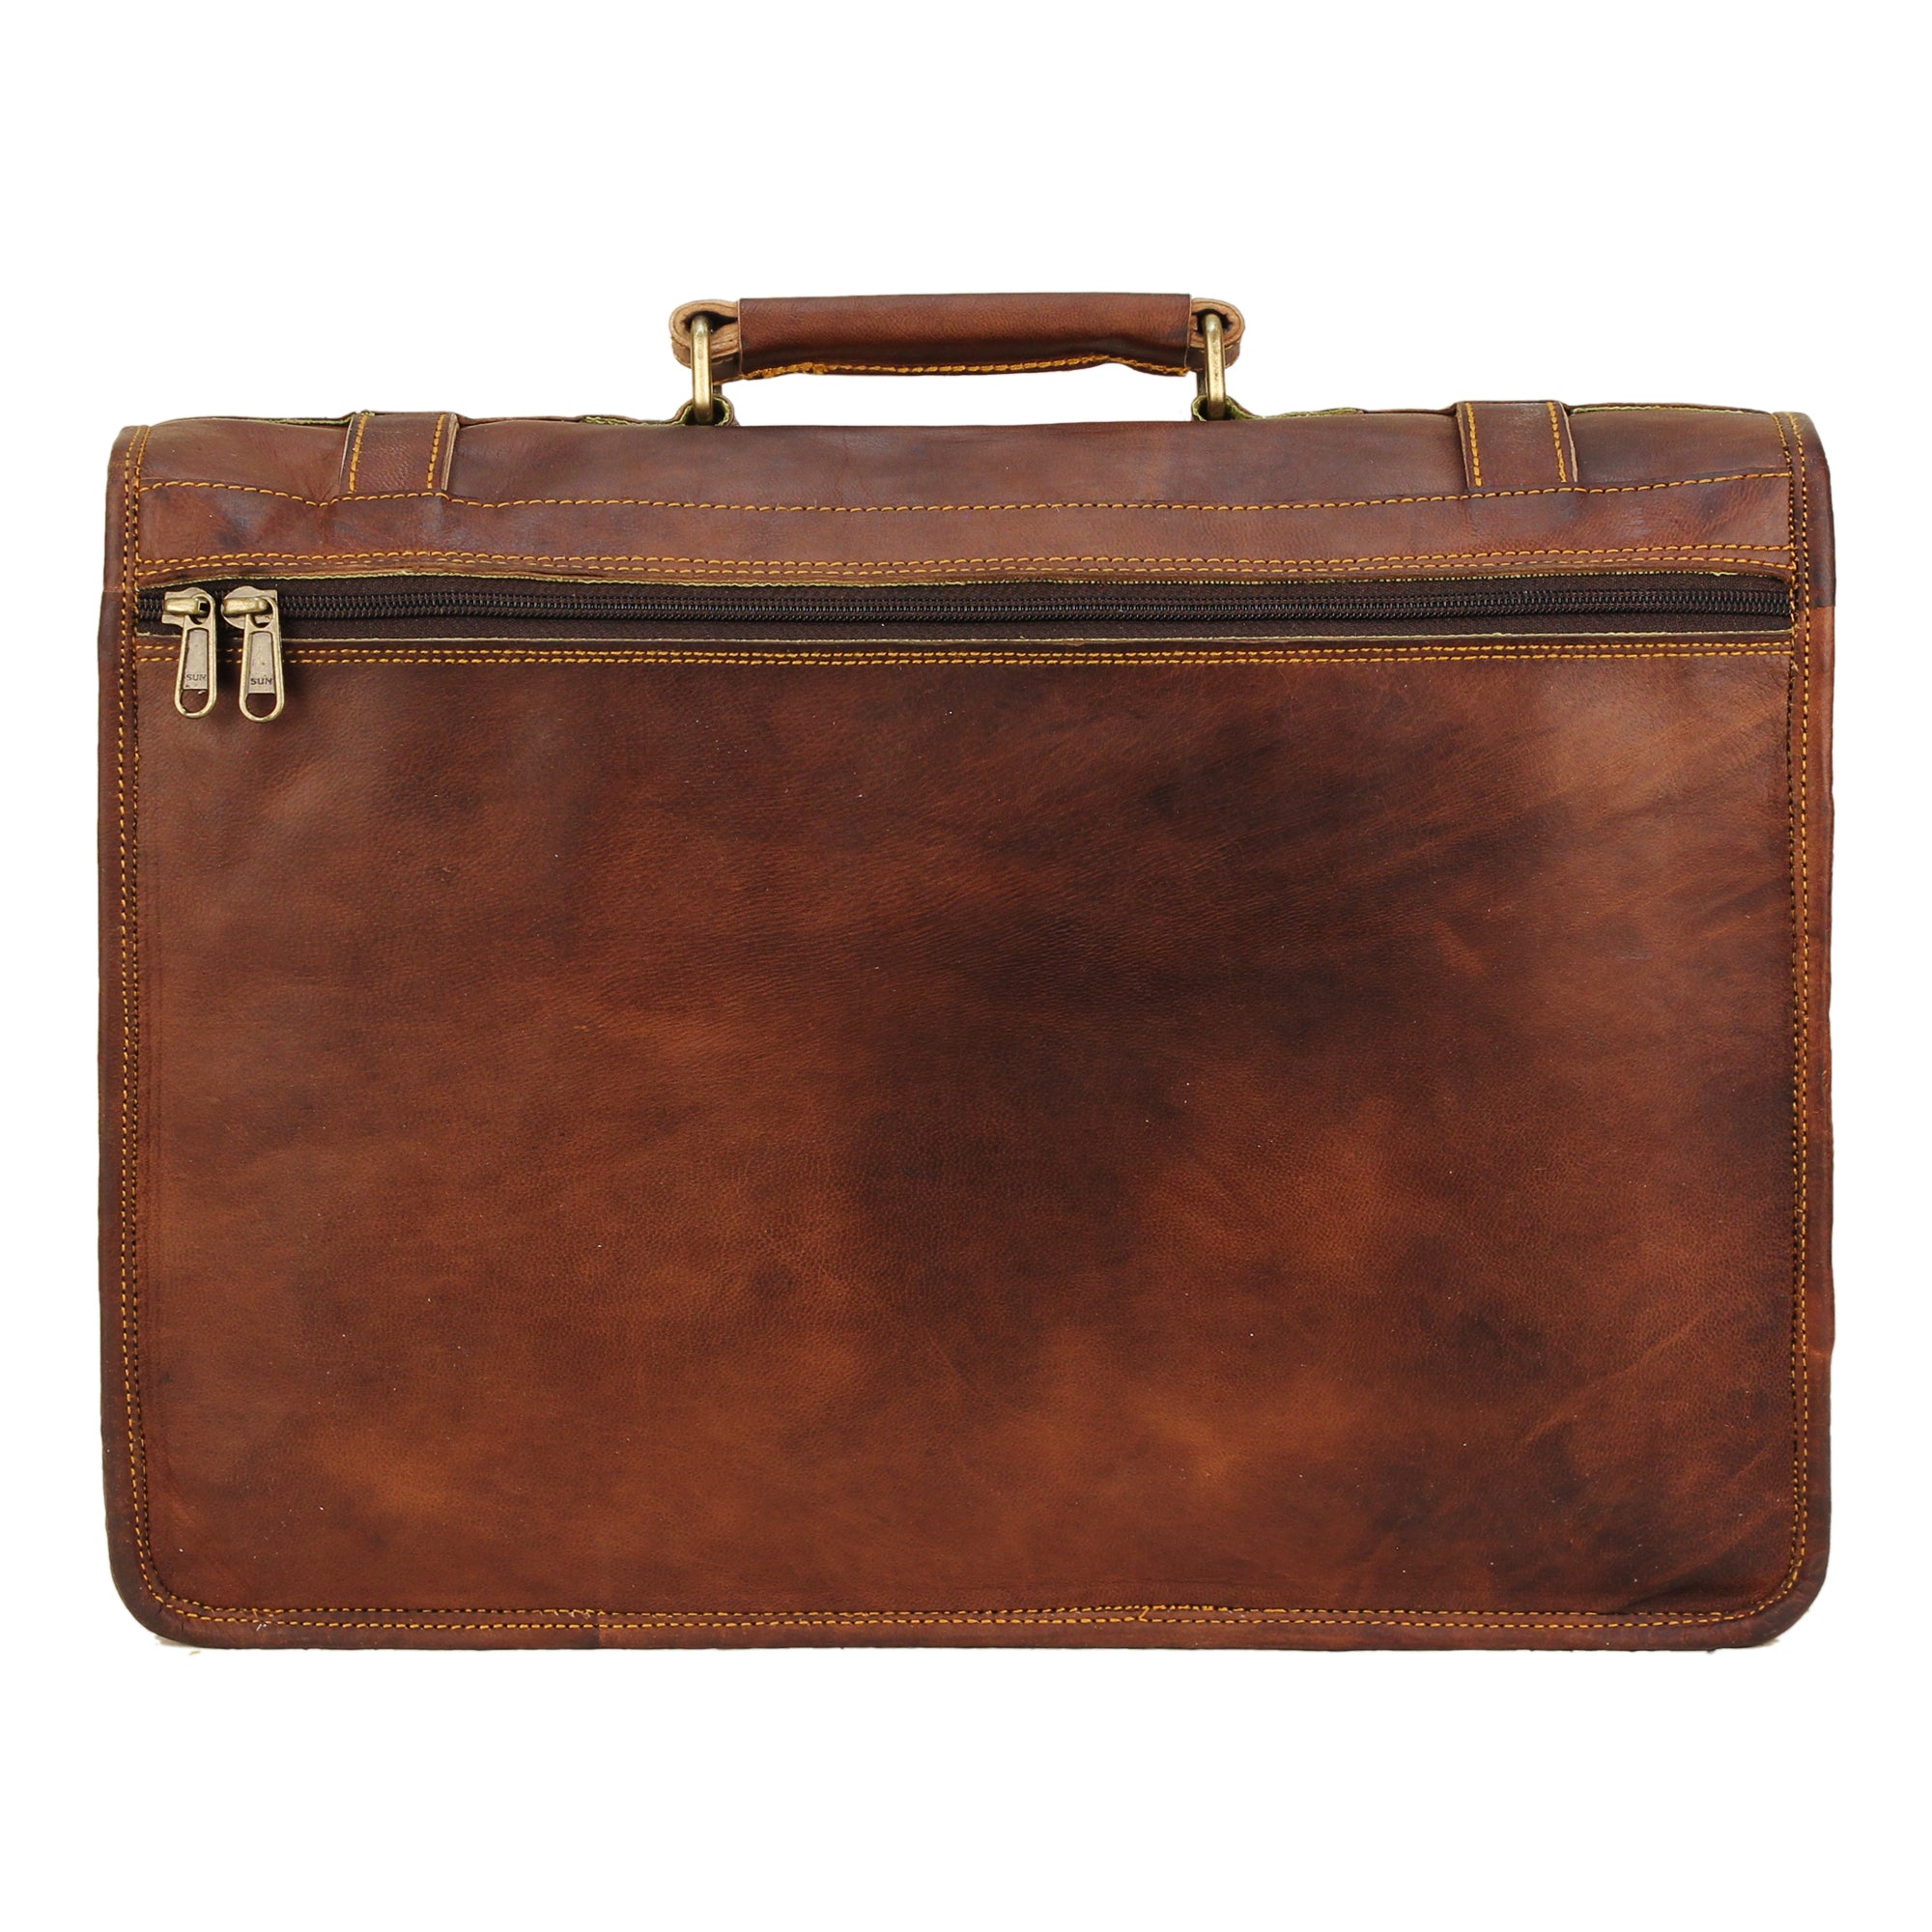 leather briefcase bag with top handle